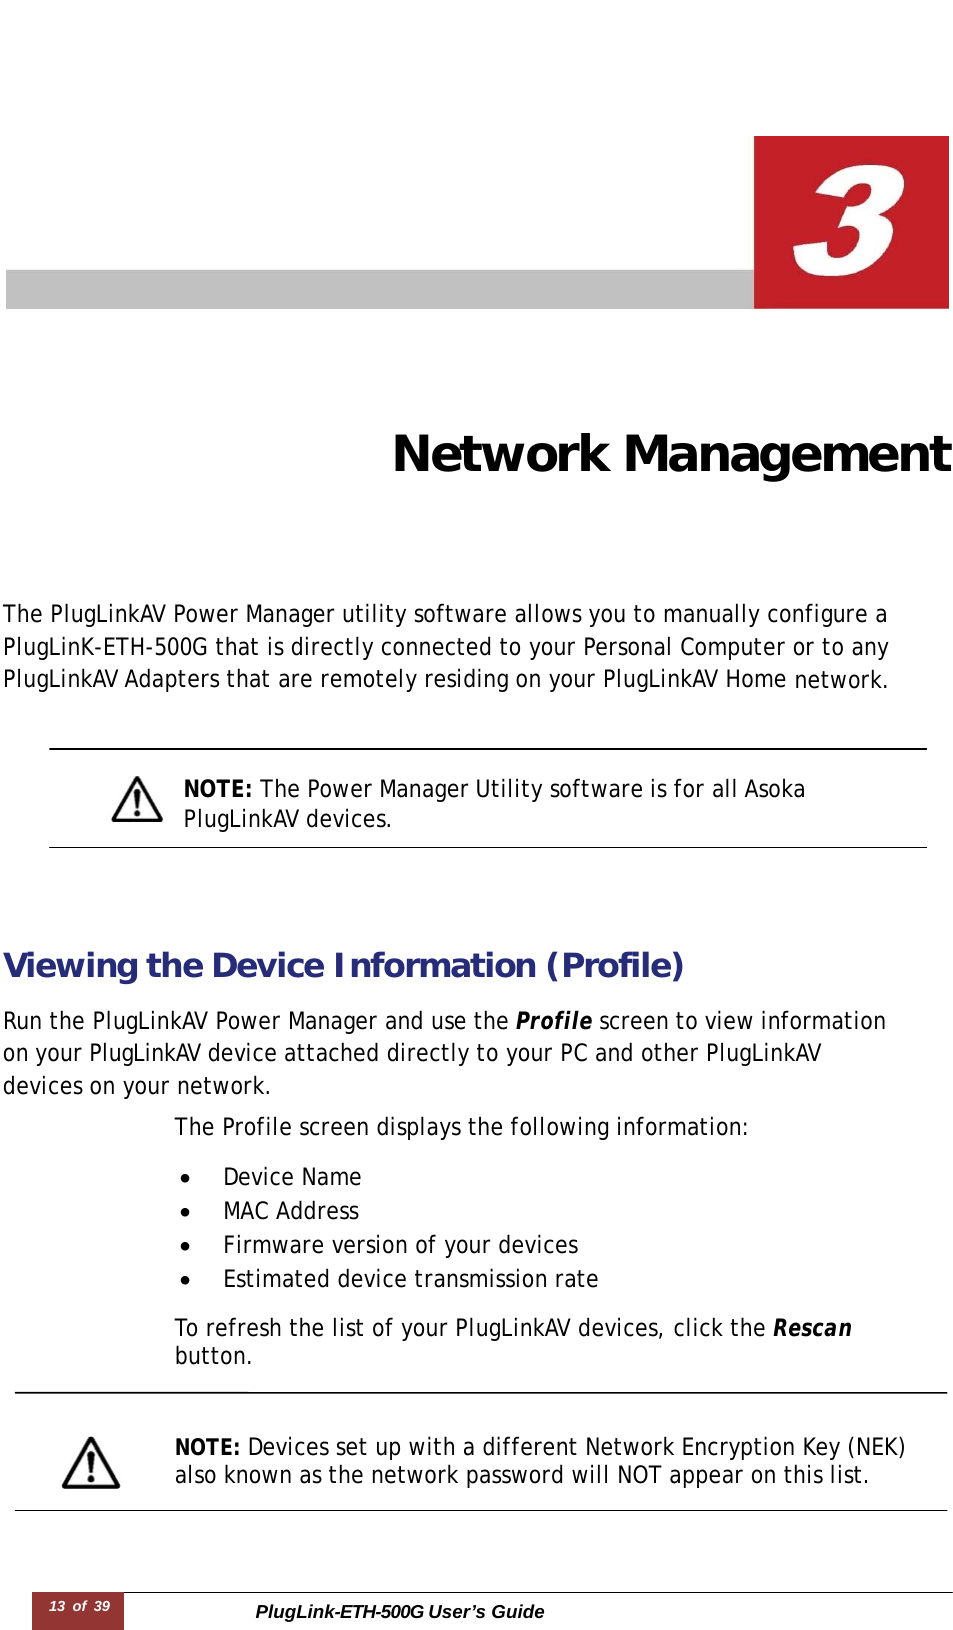 PlugLink-ETH-500G User’s Guide 13 of 39        Network Management The PlugLinkAV Power Manager utility software allows you to manually configure a   PlugLinK-ETH-500G that is directly connected to your Personal Computer or to any PlugLinkAV Adapters that are remotely residing on your PlugLinkAV Home network.     NOTE: The Power Manager Utility software is for all Asoka  PlugLinkAV devices.     Viewing the Device Information (Profile)  Run the PlugLinkAV Power Manager and use the Profile screen to view information  on your PlugLinkAV device attached directly to your PC and other PlugLinkAV  devices on your network.  The Profile screen displays the following information:  •  Device Name •  MAC Address •  Firmware version of your devices •  Estimated device transmission rate  To refresh the list of your PlugLinkAV devices, click the Rescan  button.    NOTE: Devices set up with a different Network Encryption Key (NEK) also known as the network password will NOT appear on this list.  